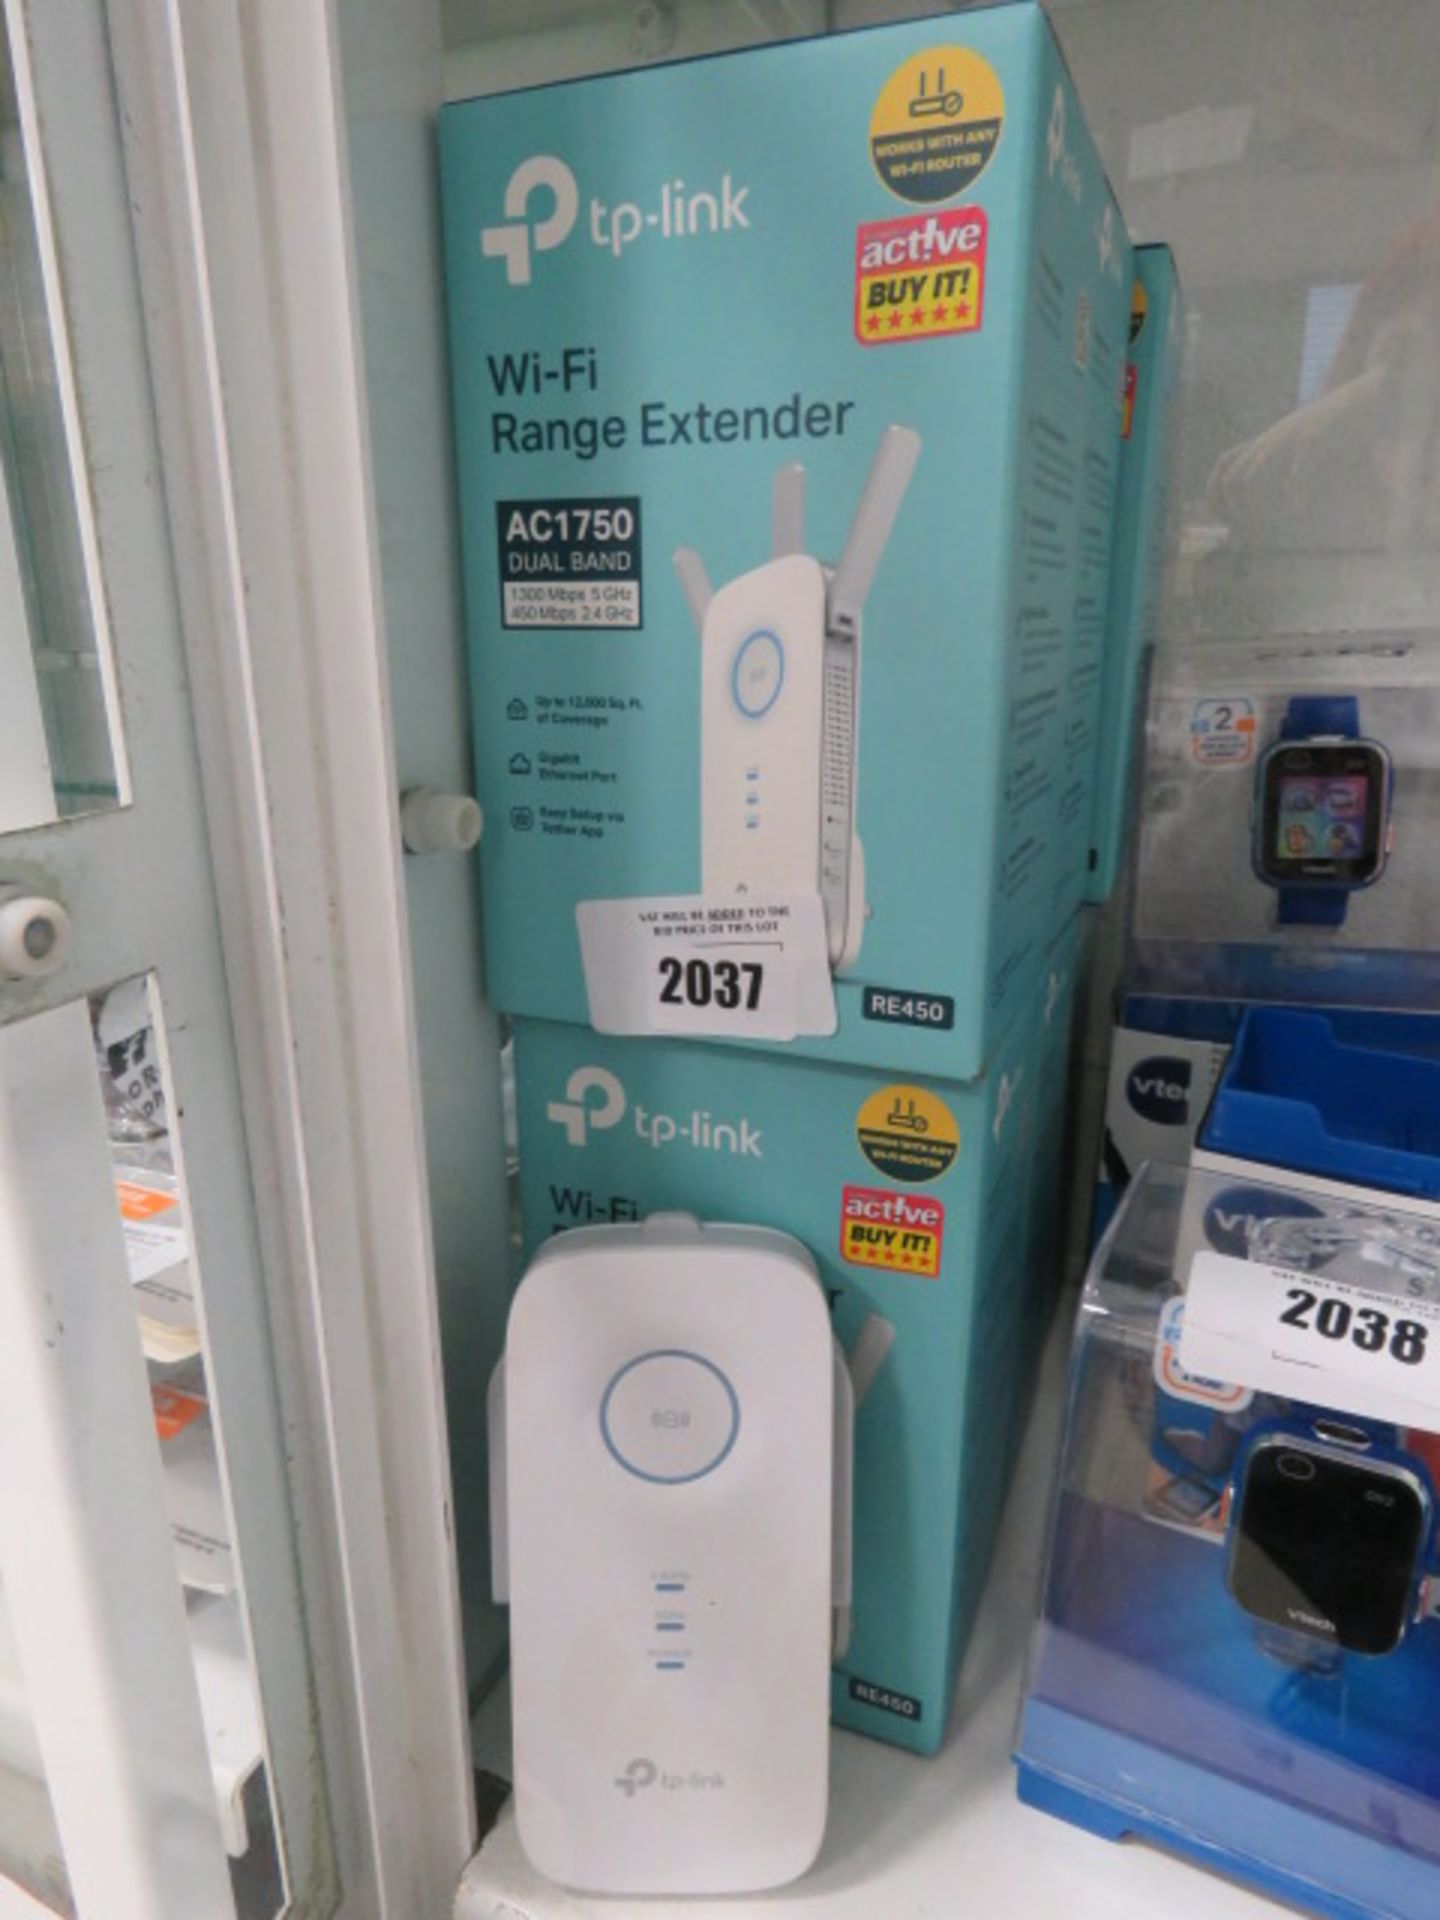 6 various TP Link wi-fi range extenders with boxes and another loose